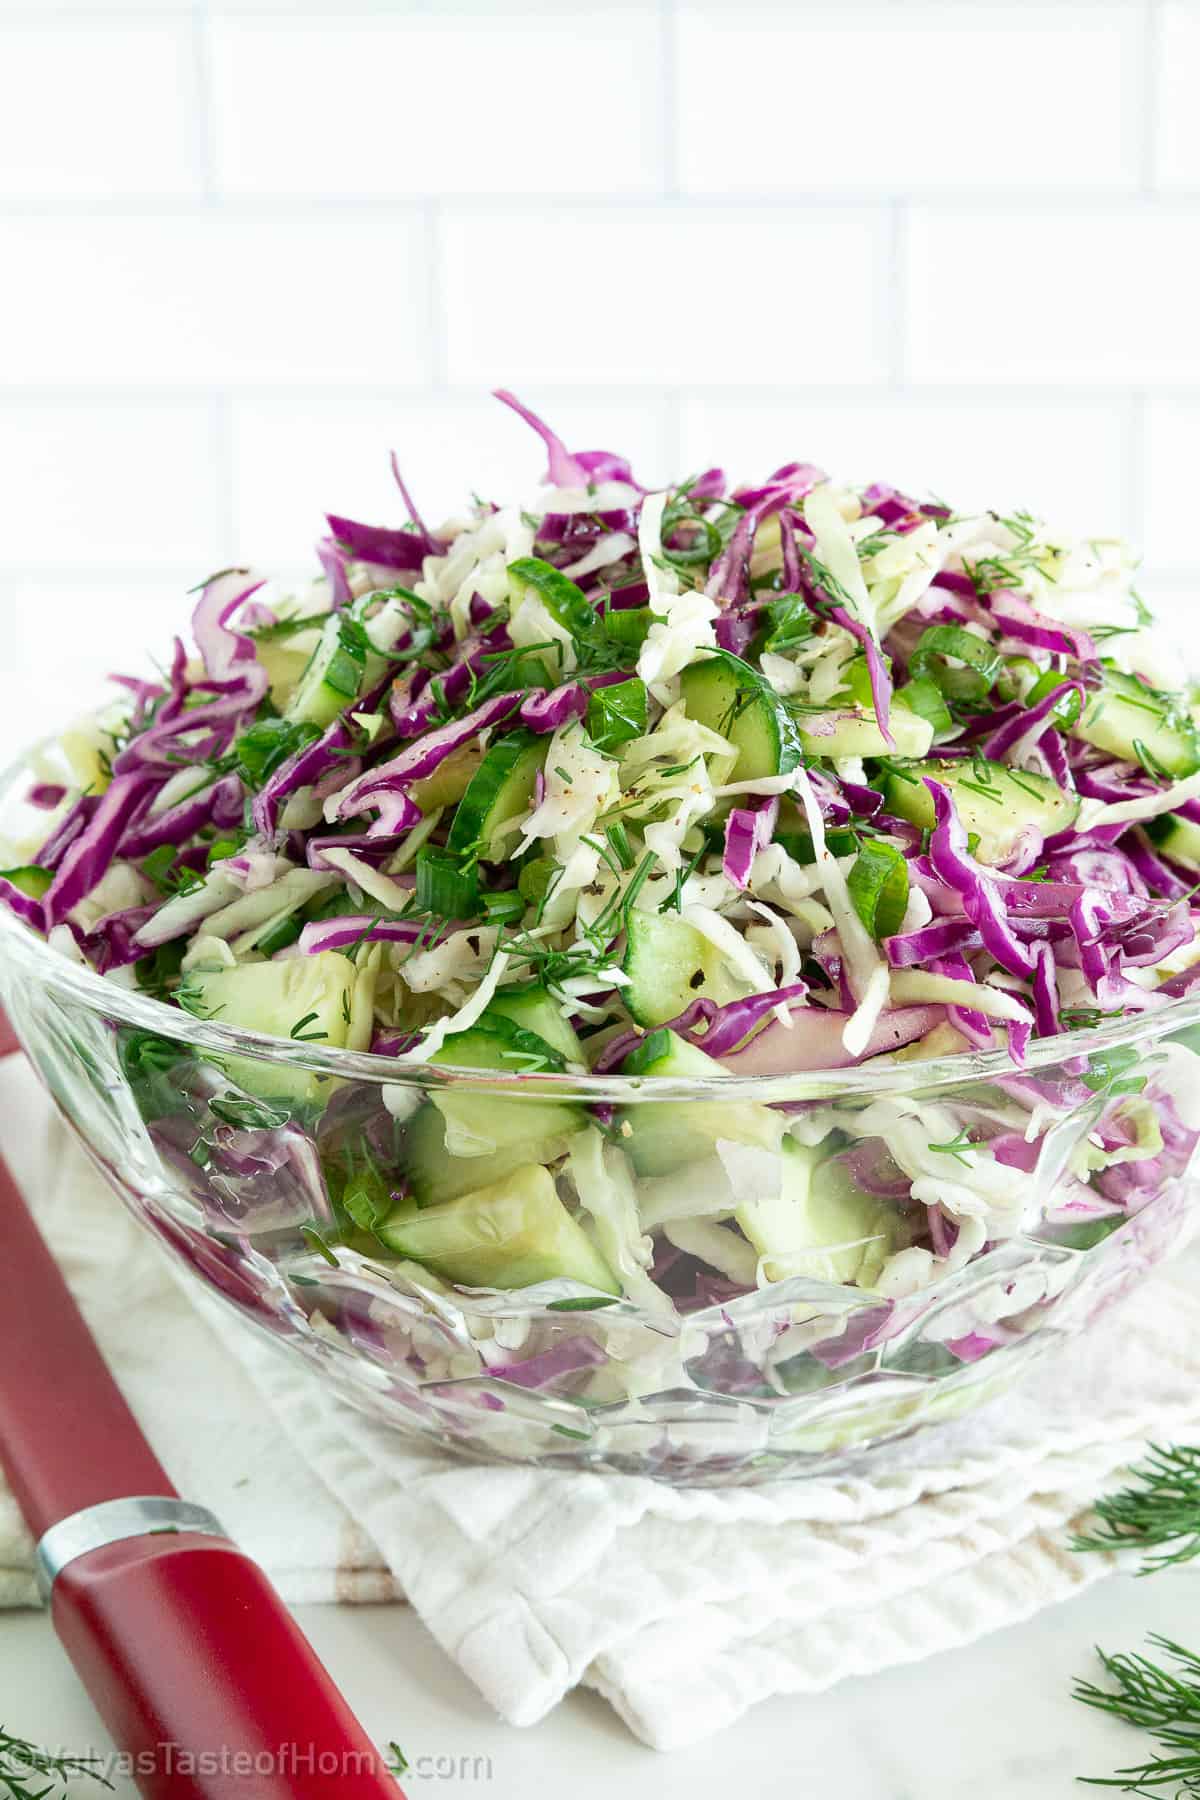 salad packed with flavor and is also easy to make. As the name suggests, it has shredded cabbage that soaks up in a delicious salad dressing to give you an unforgettable flavor.